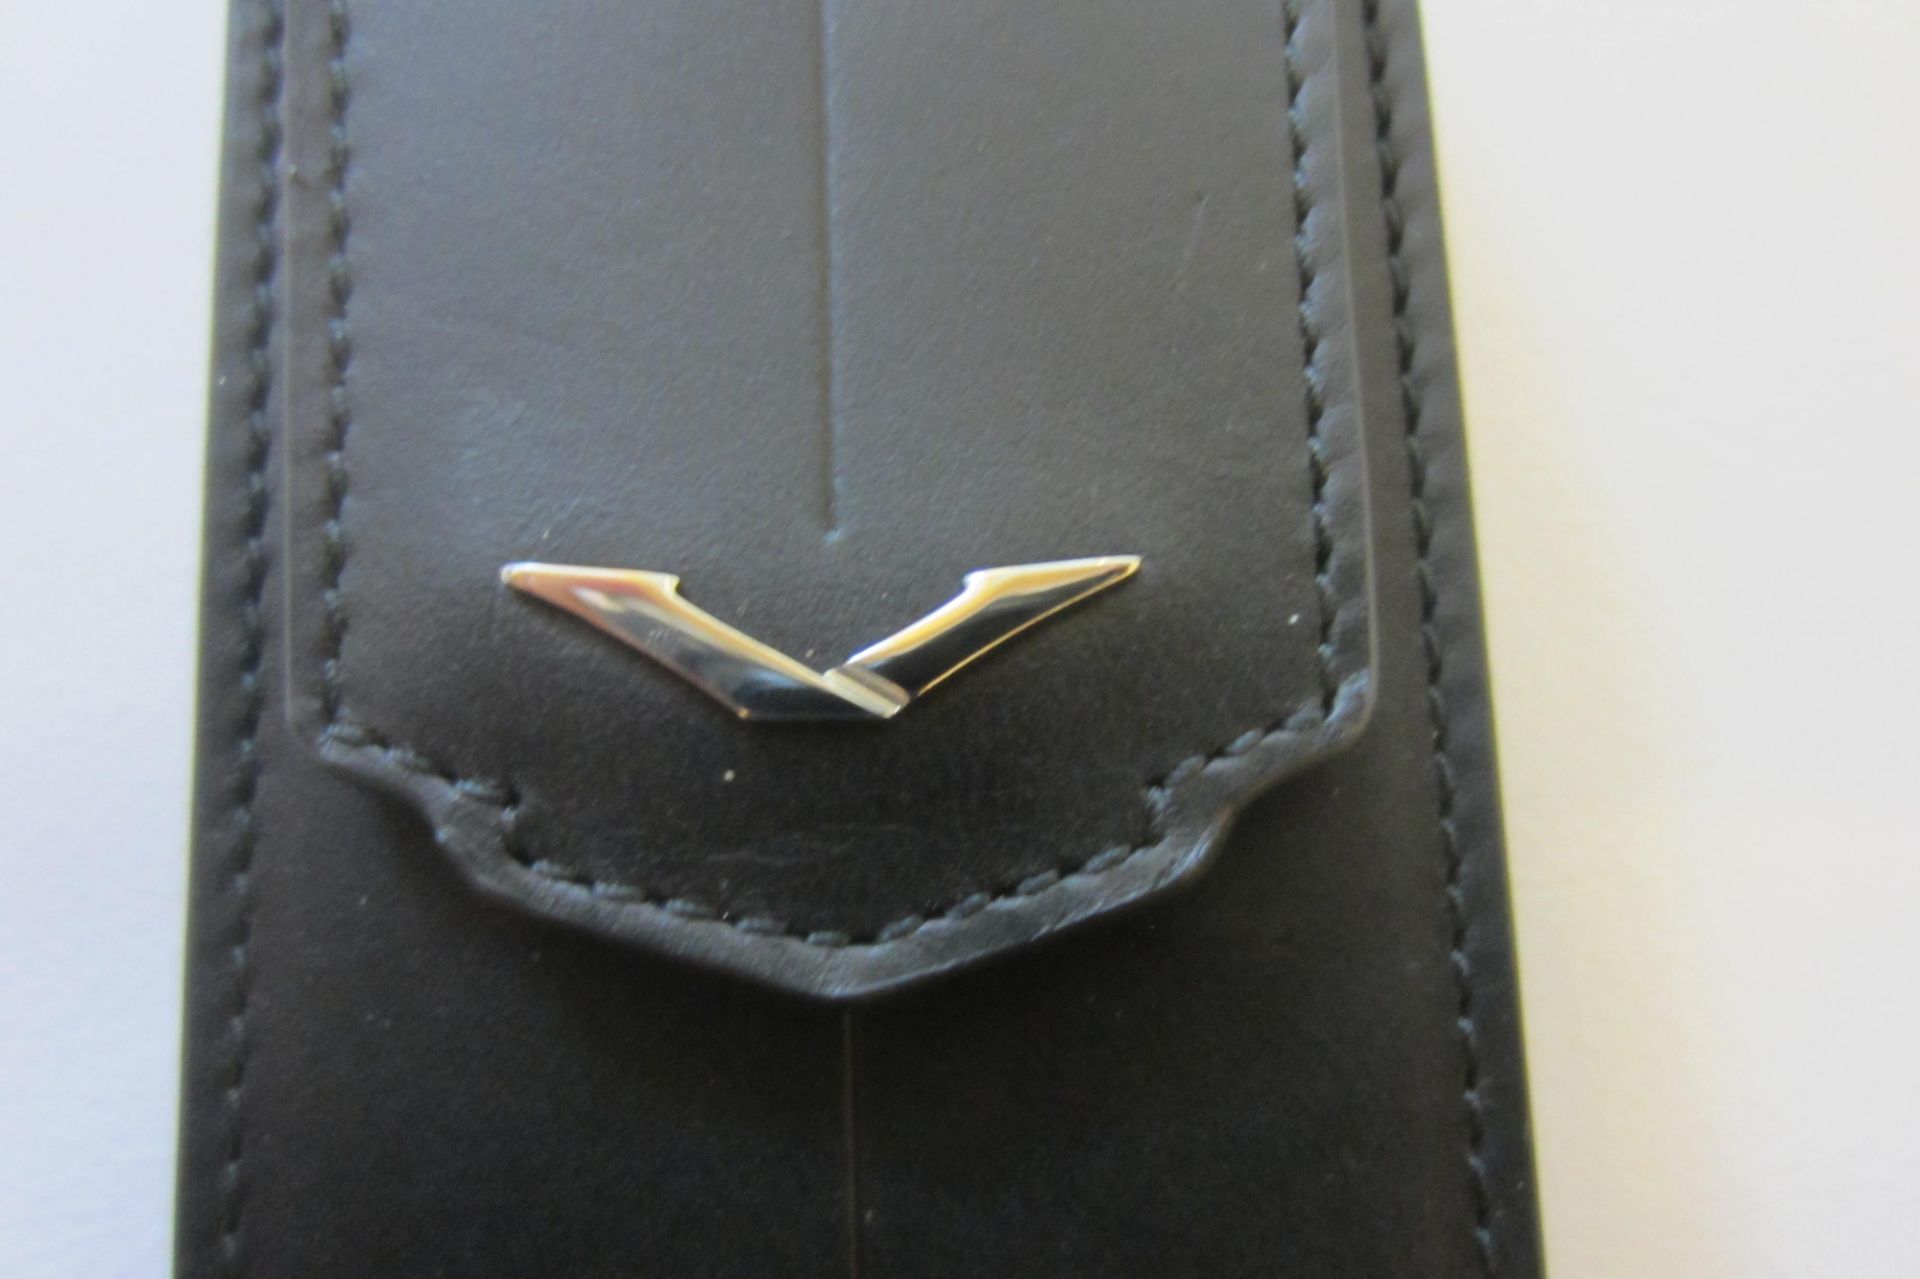 Signature S Black Leather Case with thought to be White Gold "V" Insignia - Image 2 of 2